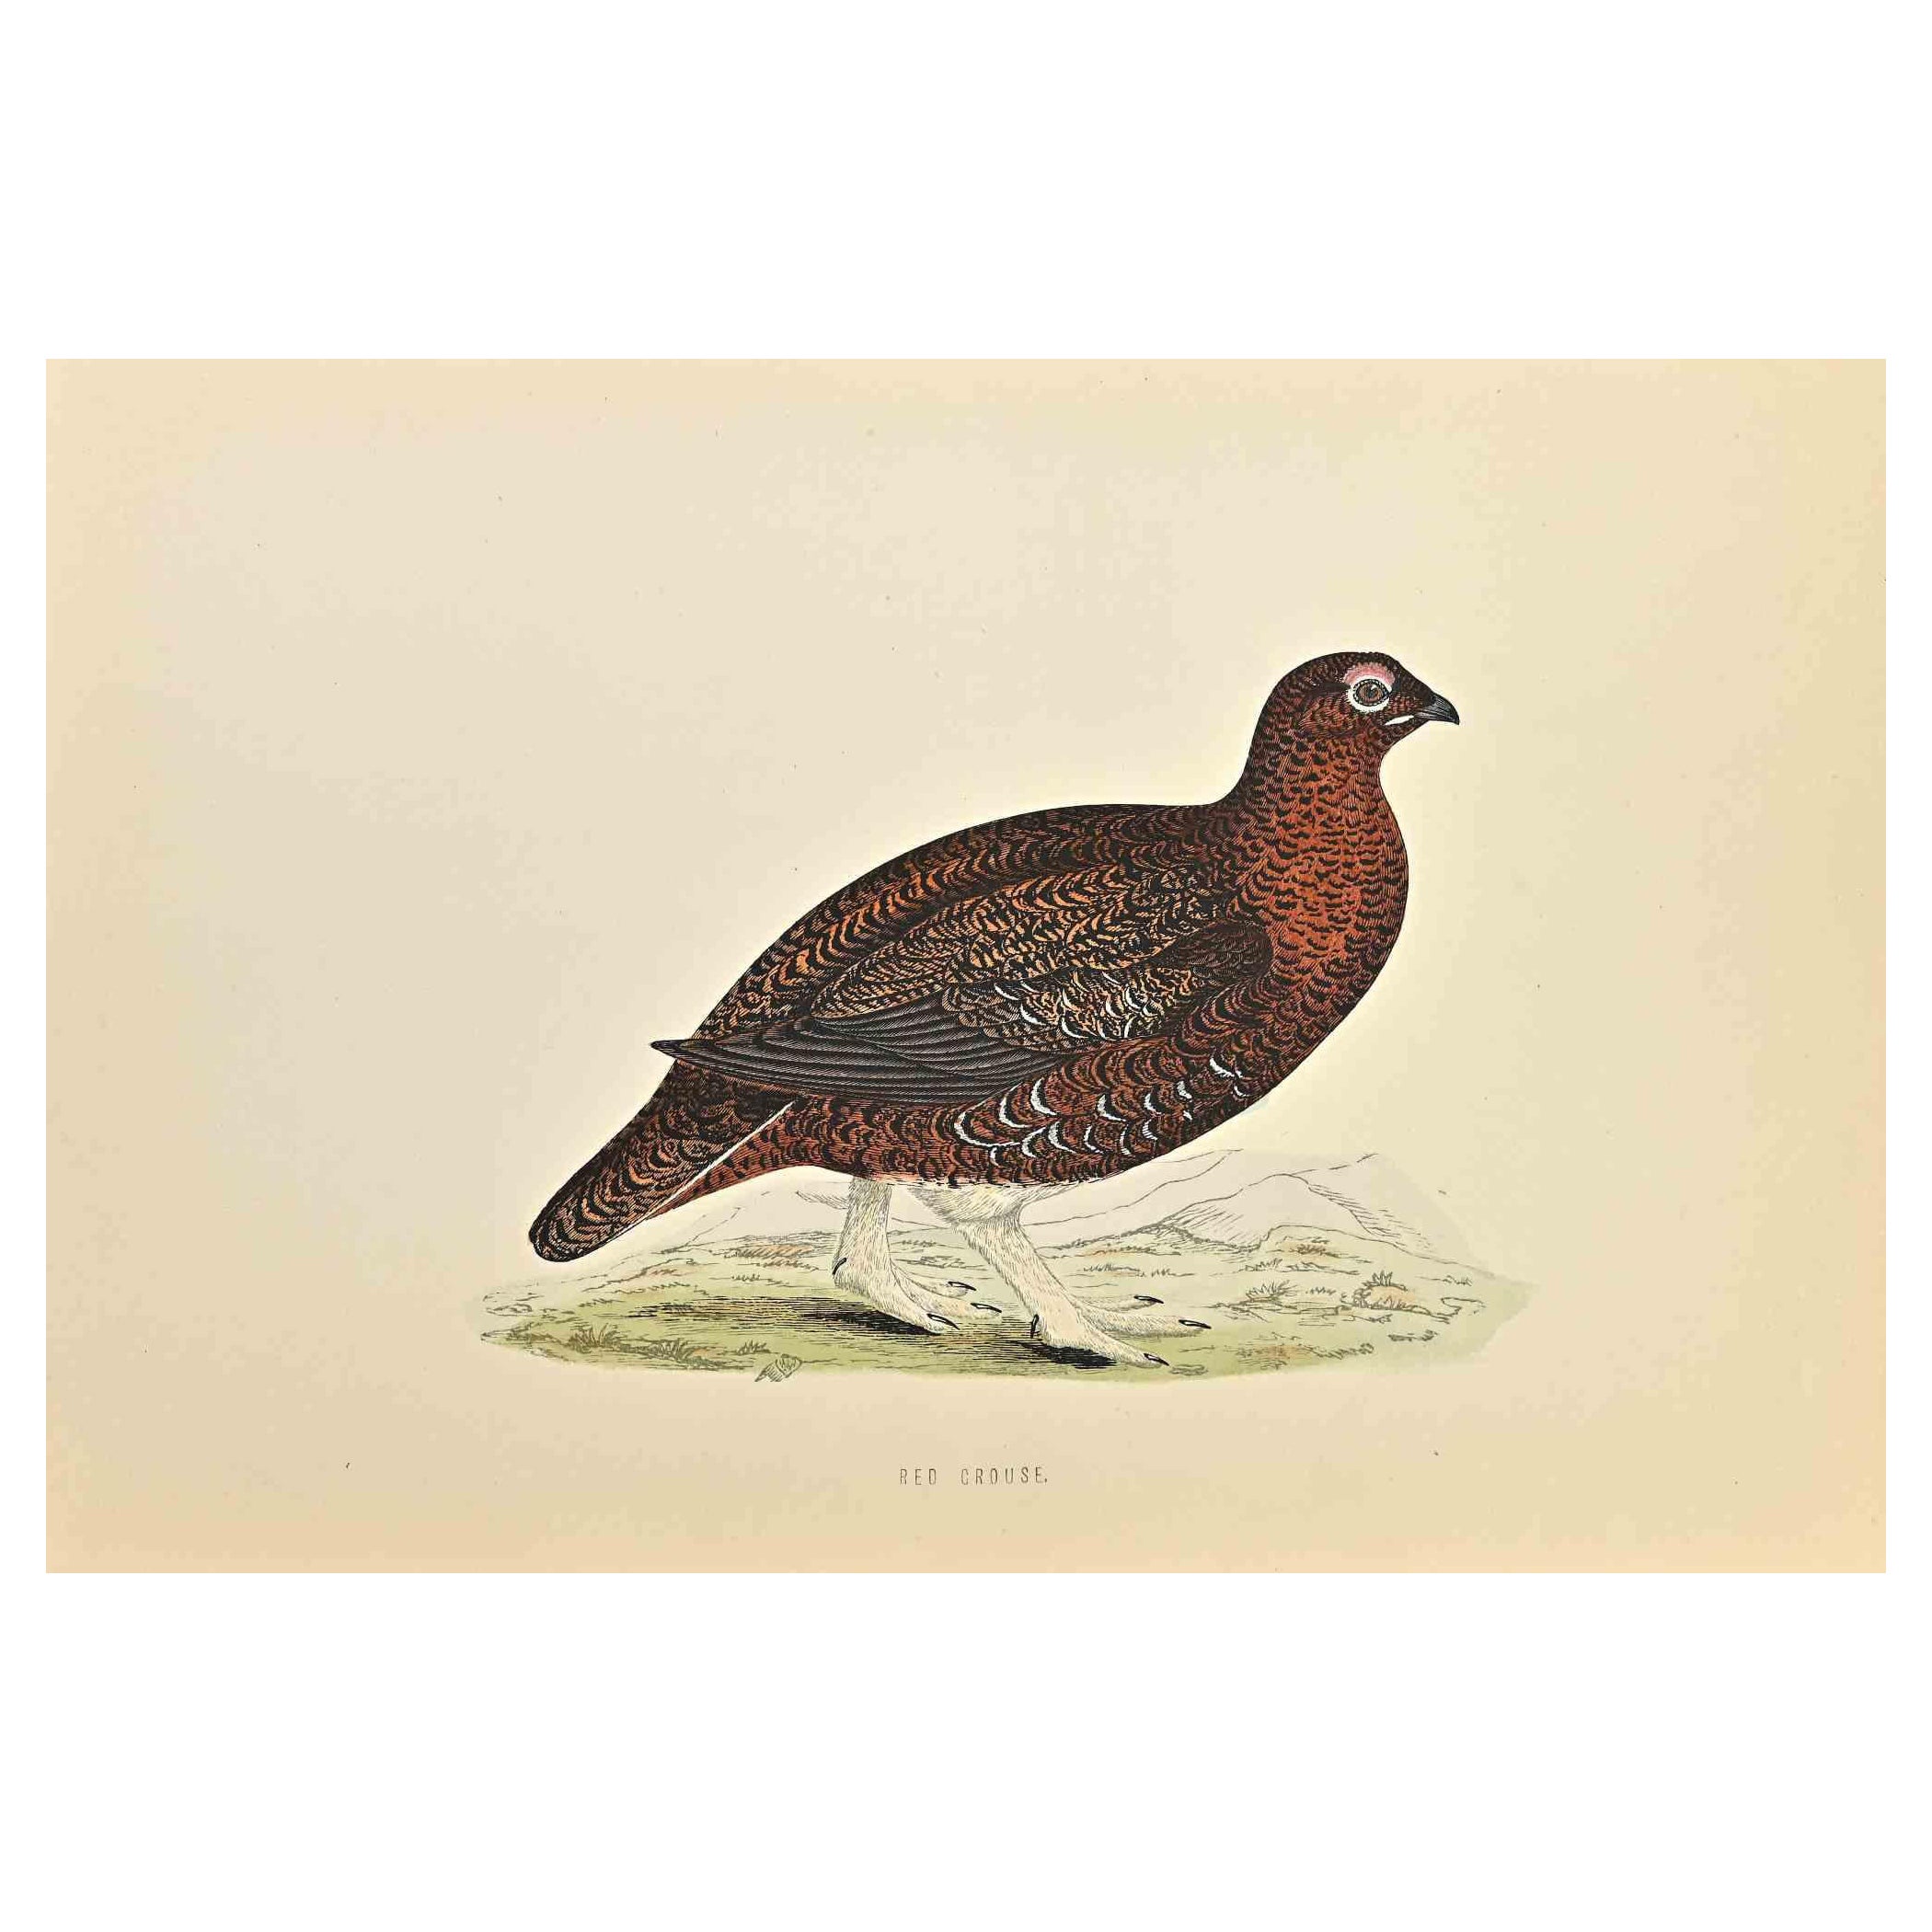 Red Grouse is a modern artwork realized in 1870 by the British artist Alexander Francis Lydon (1836-1917) . 

Woodcut print, hand colored, published by London, Bell & Sons, 1870.  Name of the bird printed in plate. This work is part of a print suite